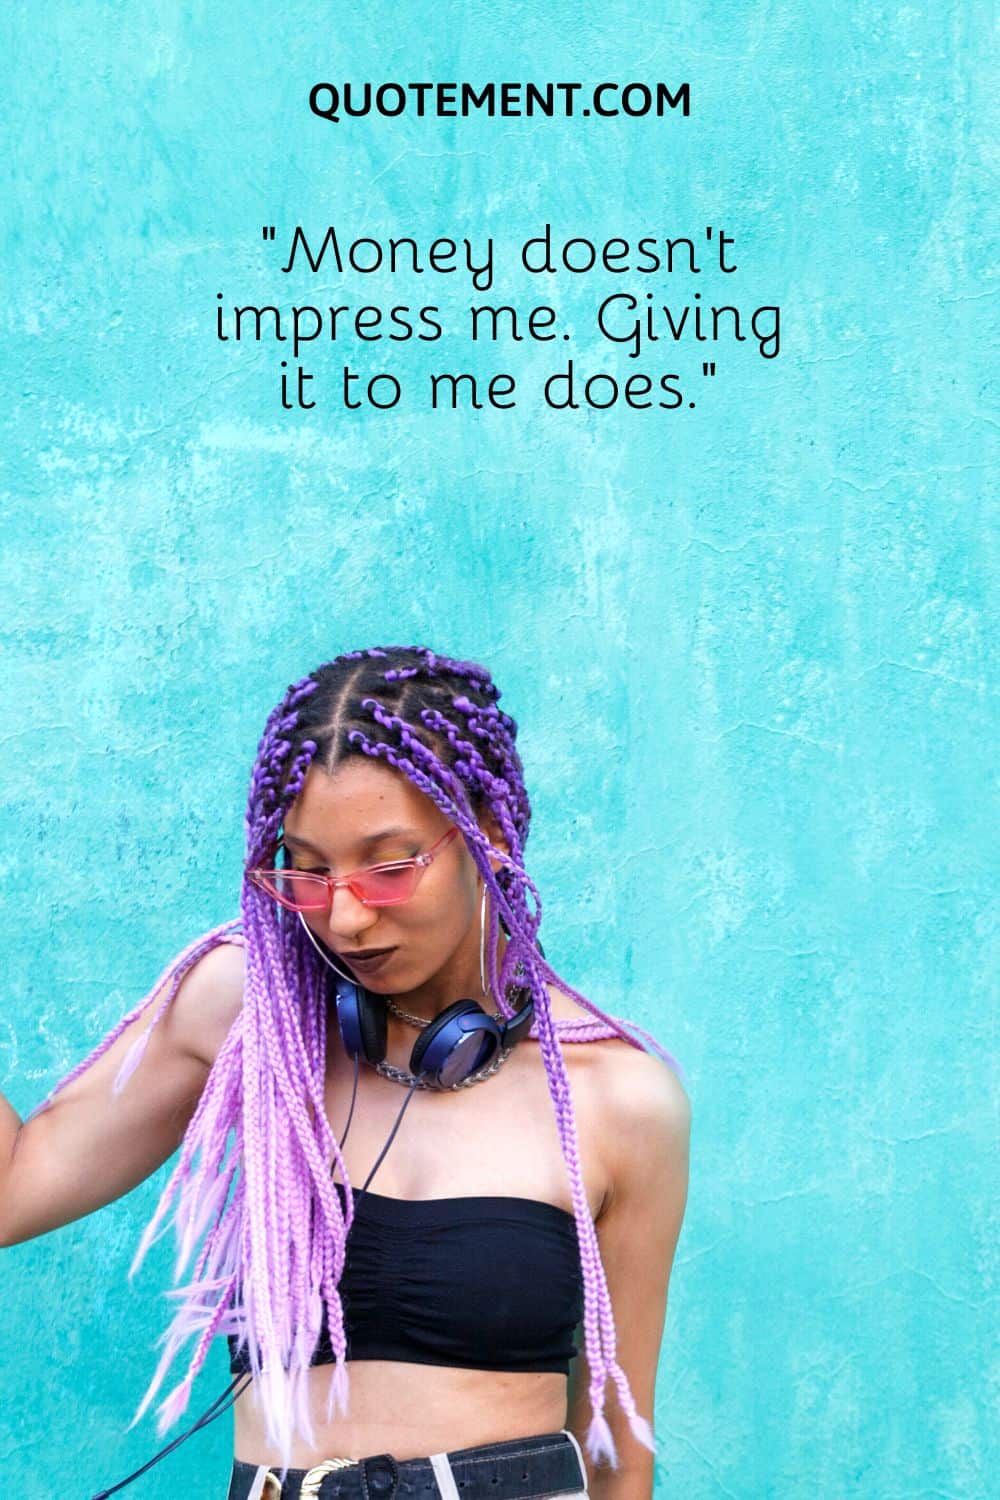 Money doesn’t impress me. Giving it to me does